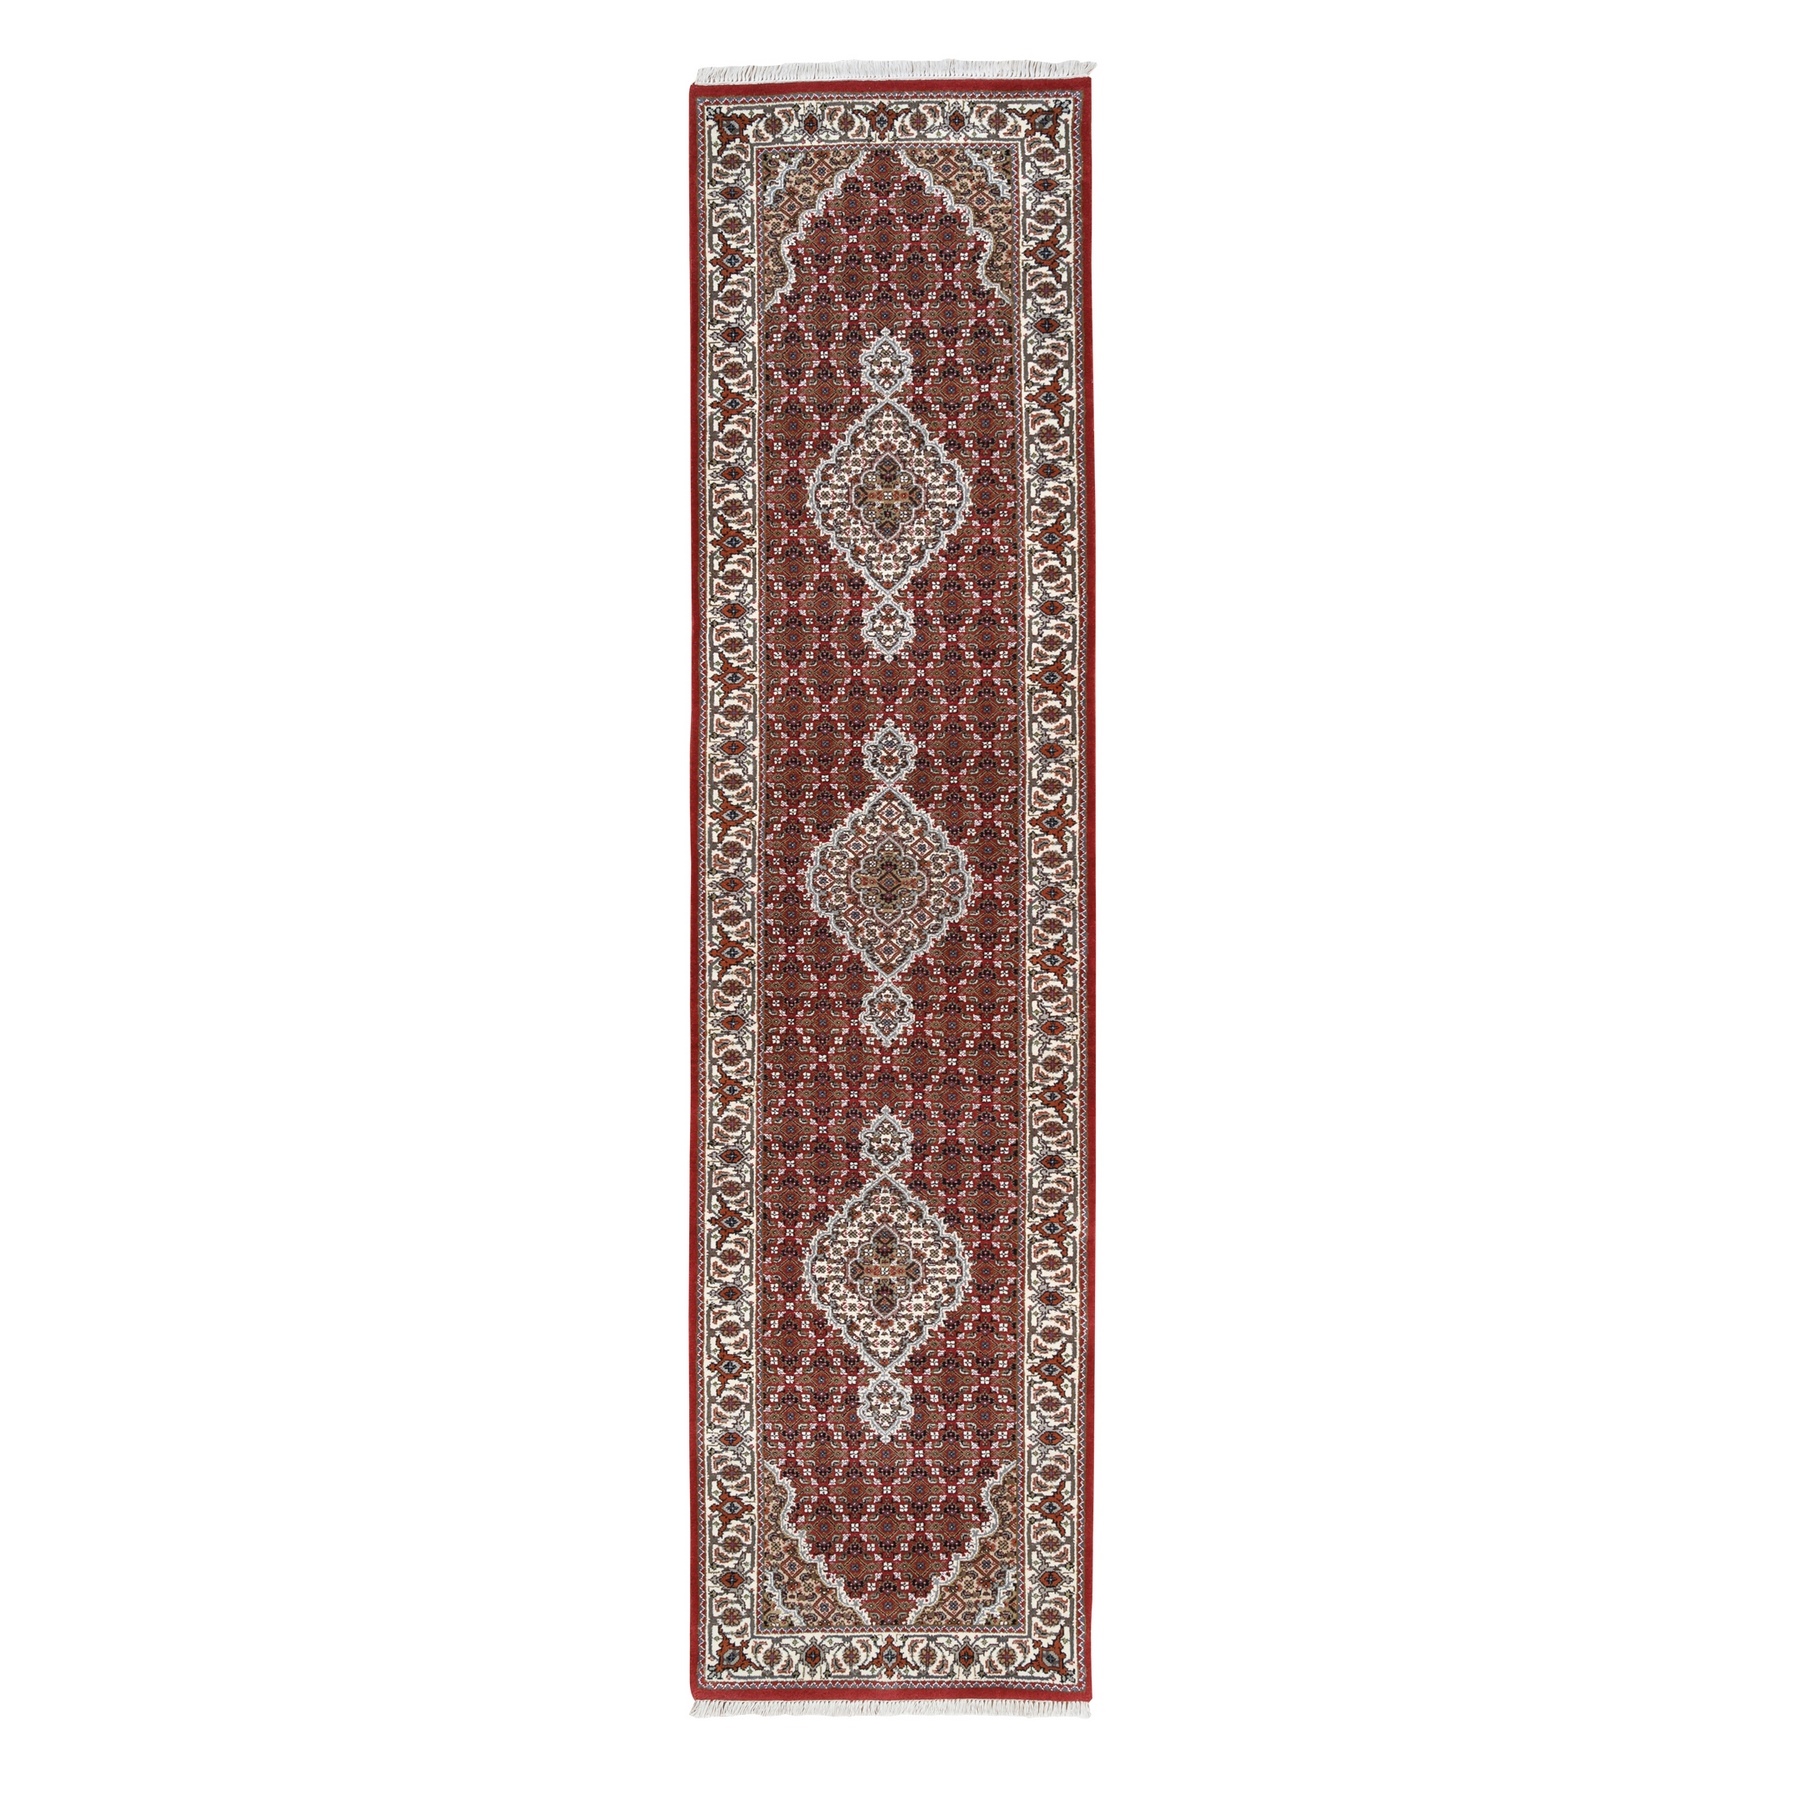 Pirniakan Collection Hand Knotted Red Rug No: 1125170